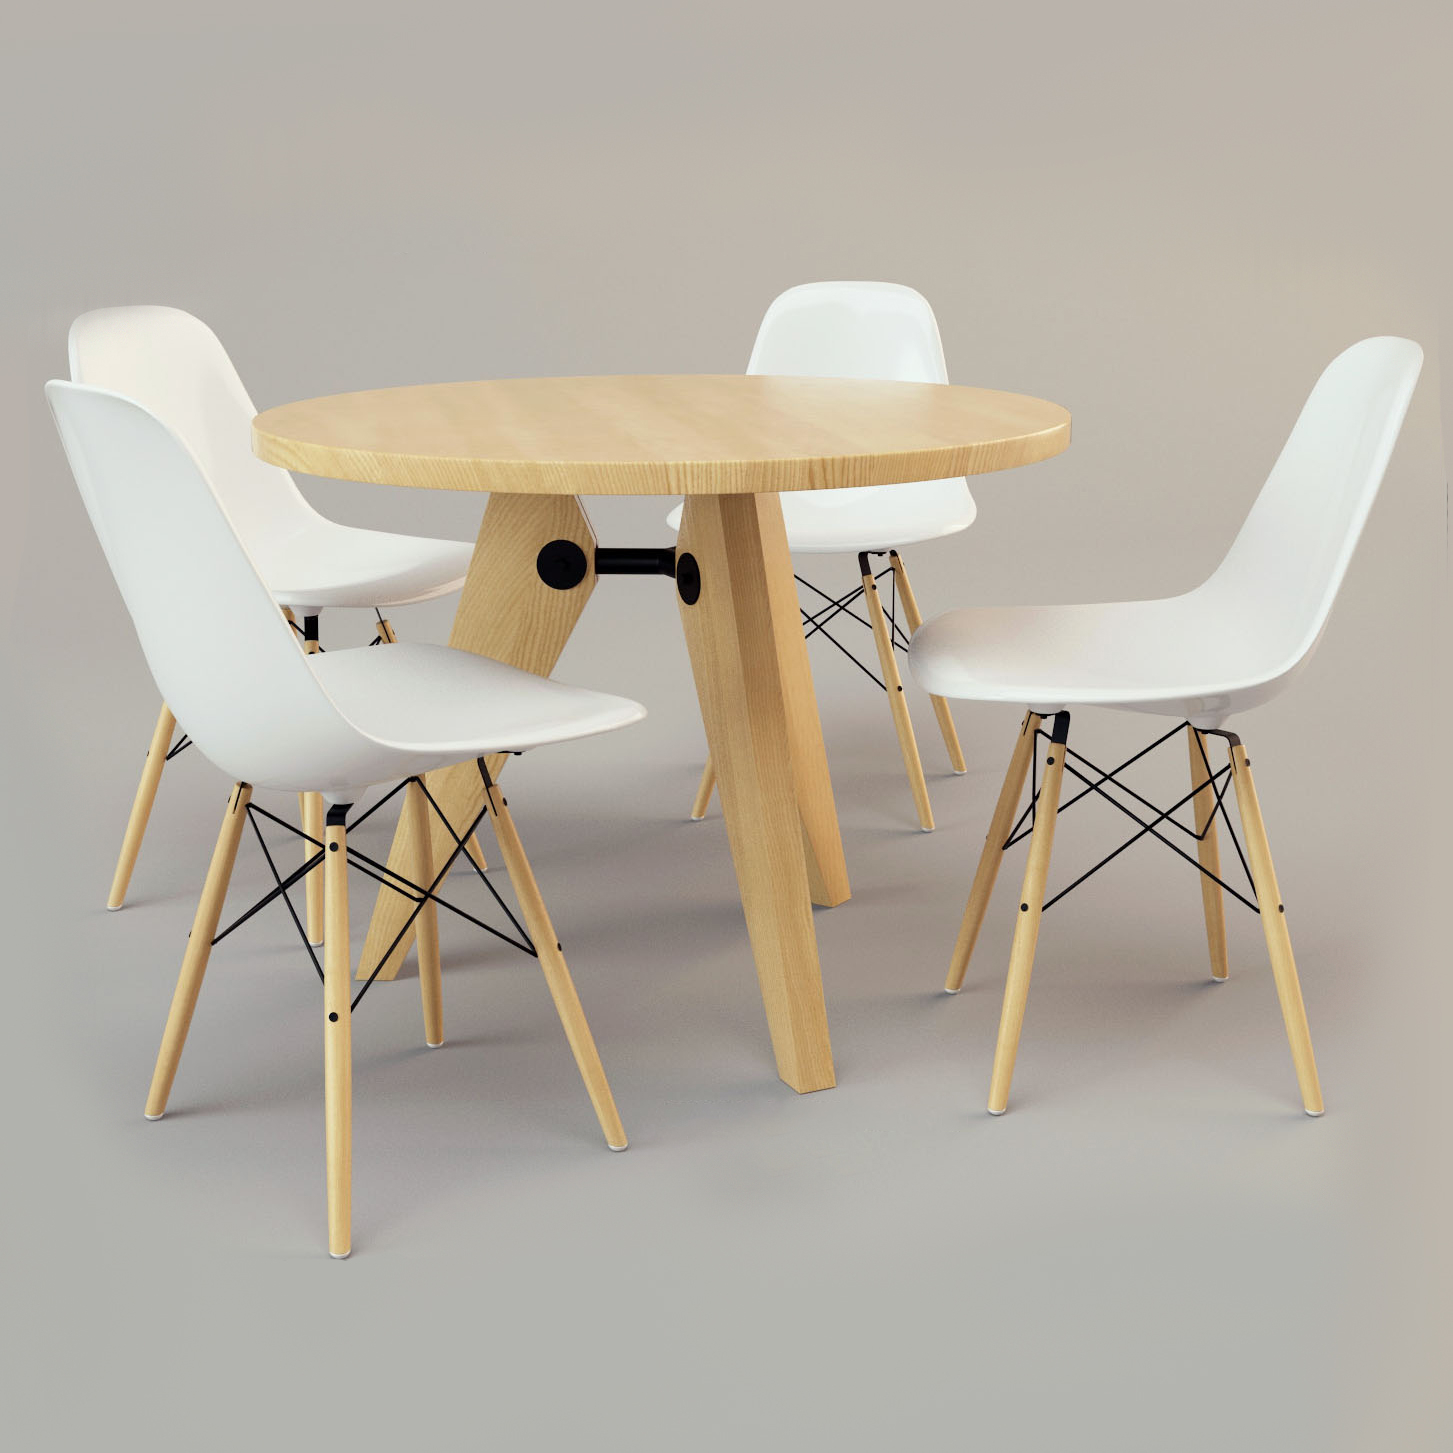 Wooden table with chairs - download 3d model | ZeelProject.com